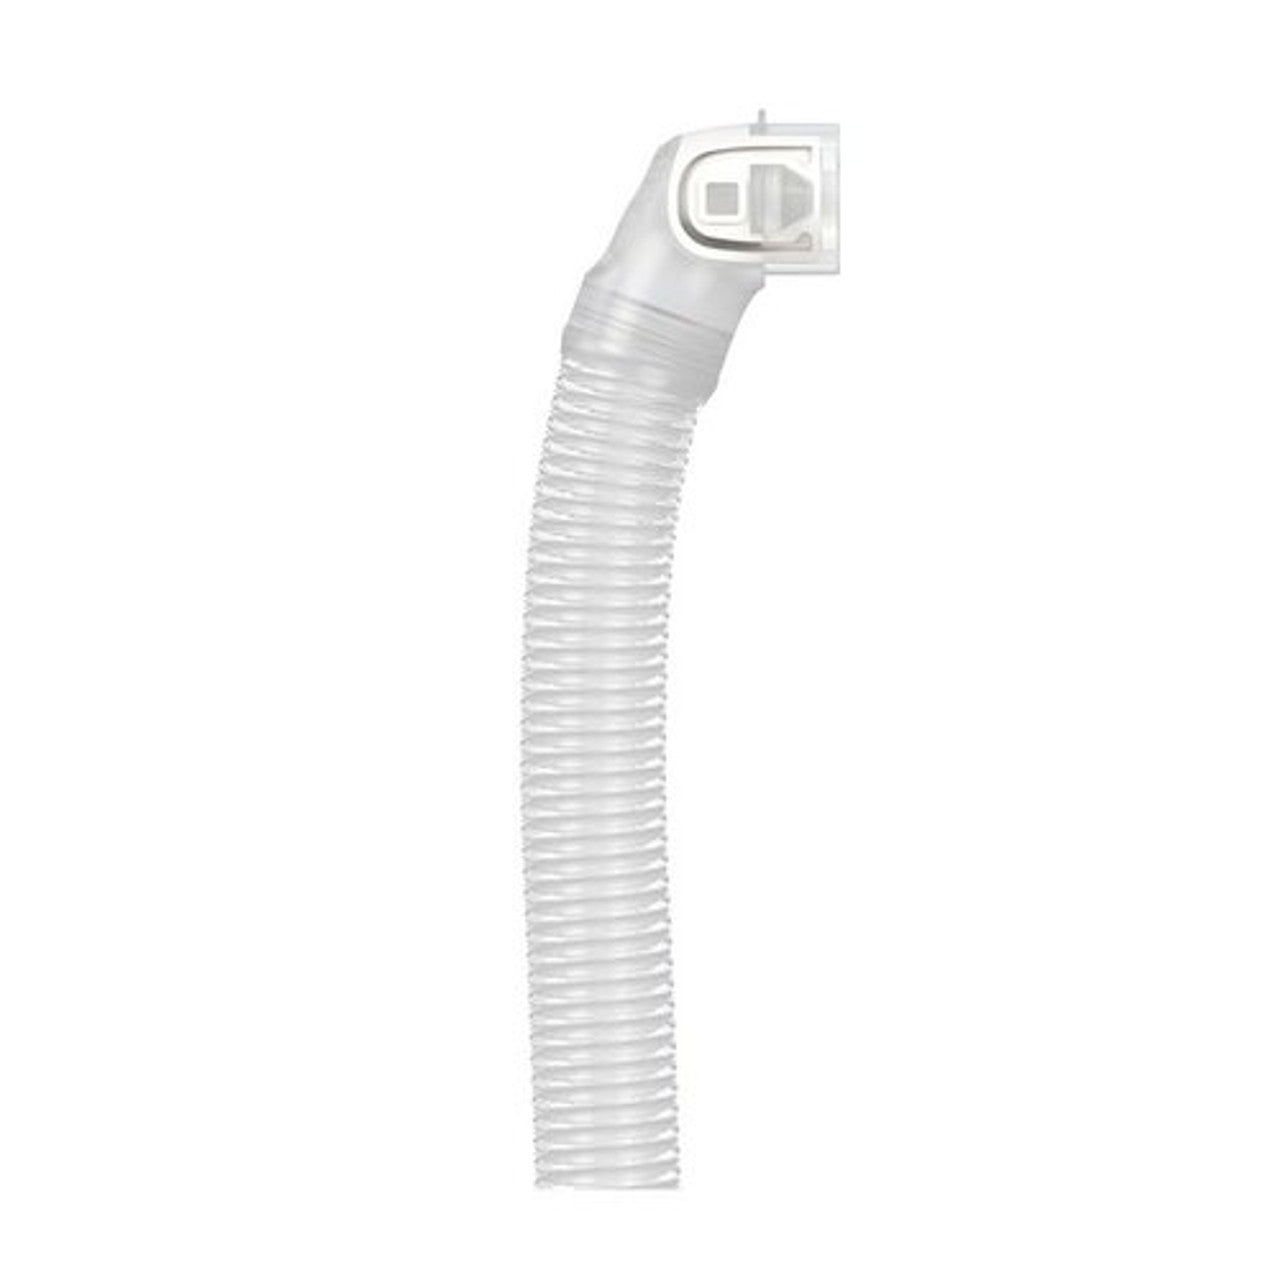  N20 Mask Elbow and Tube